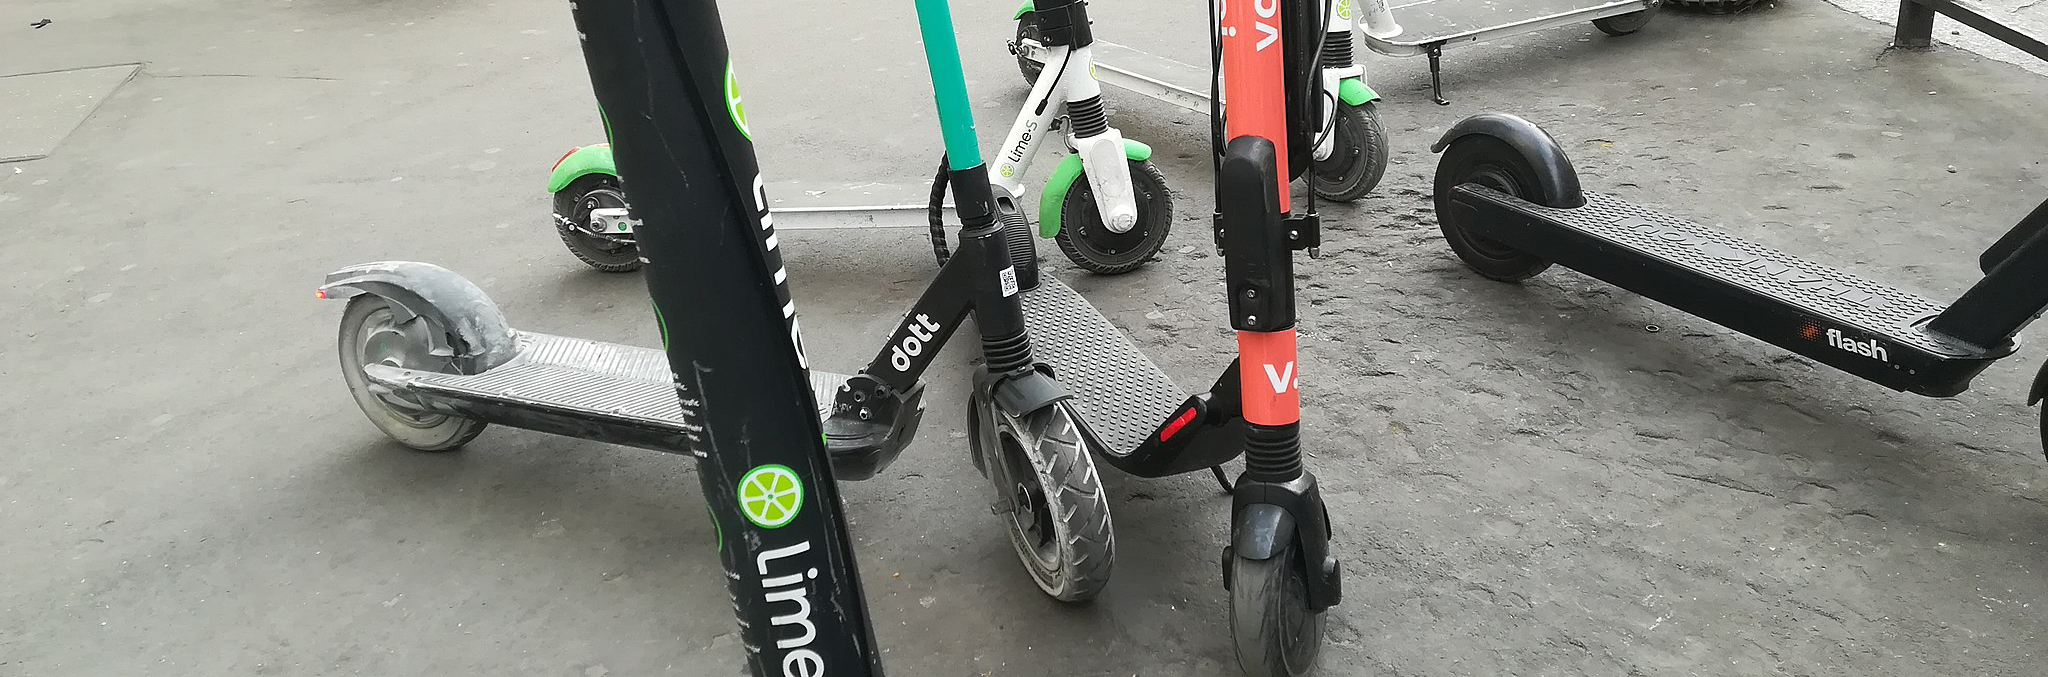 E-Scooters Are Everywhere. They're Also a Bubble.